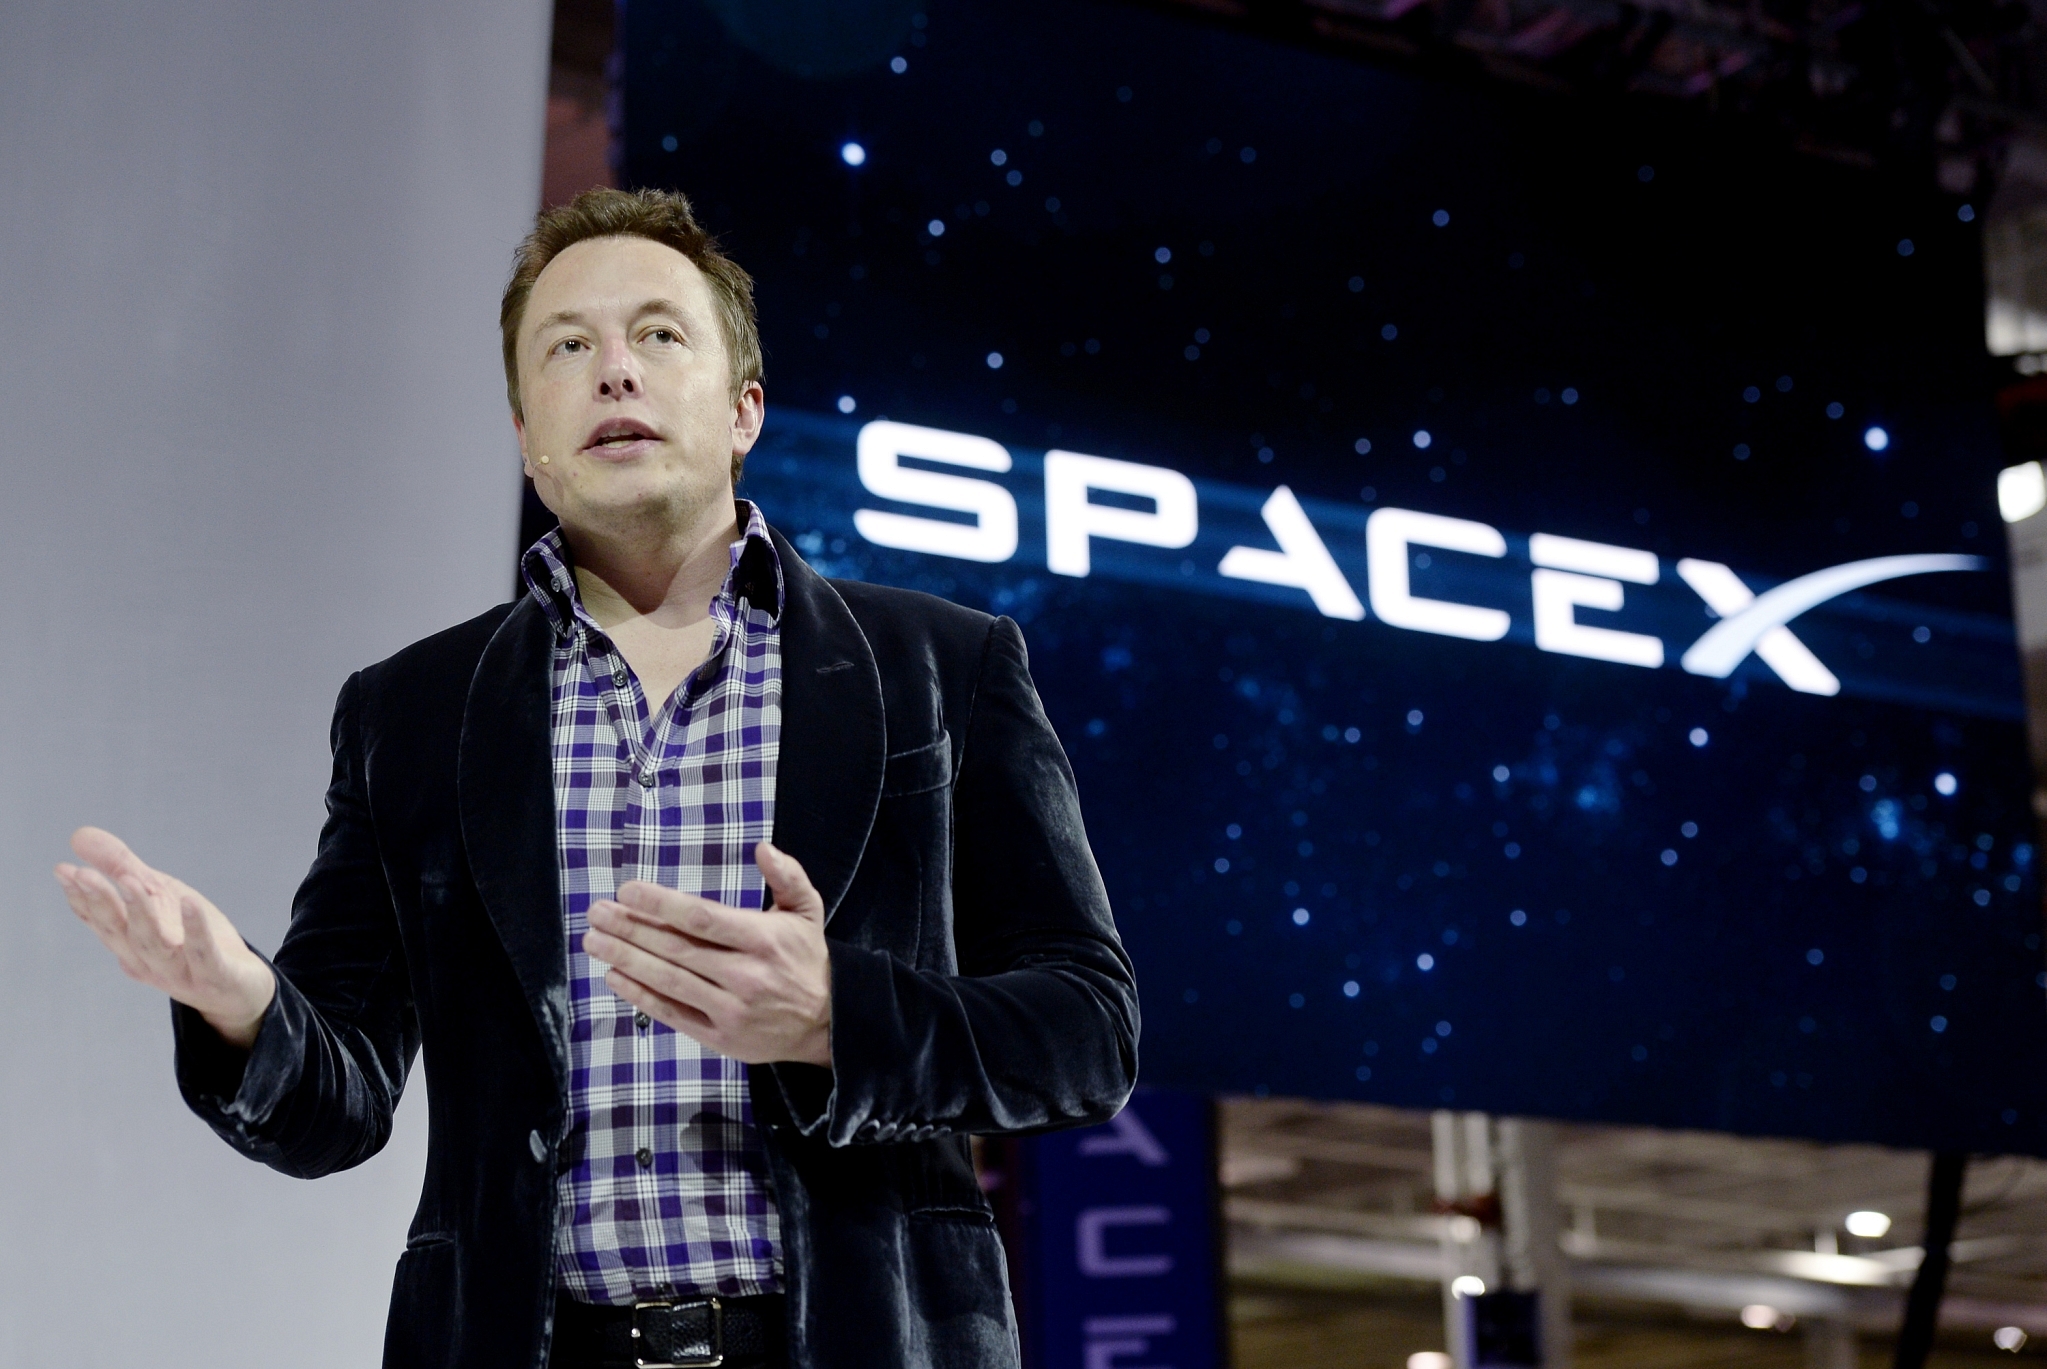 SpaceX chief executive officer Elon Musk   (Kevork Djansezian/GettyImages)&nbsp;